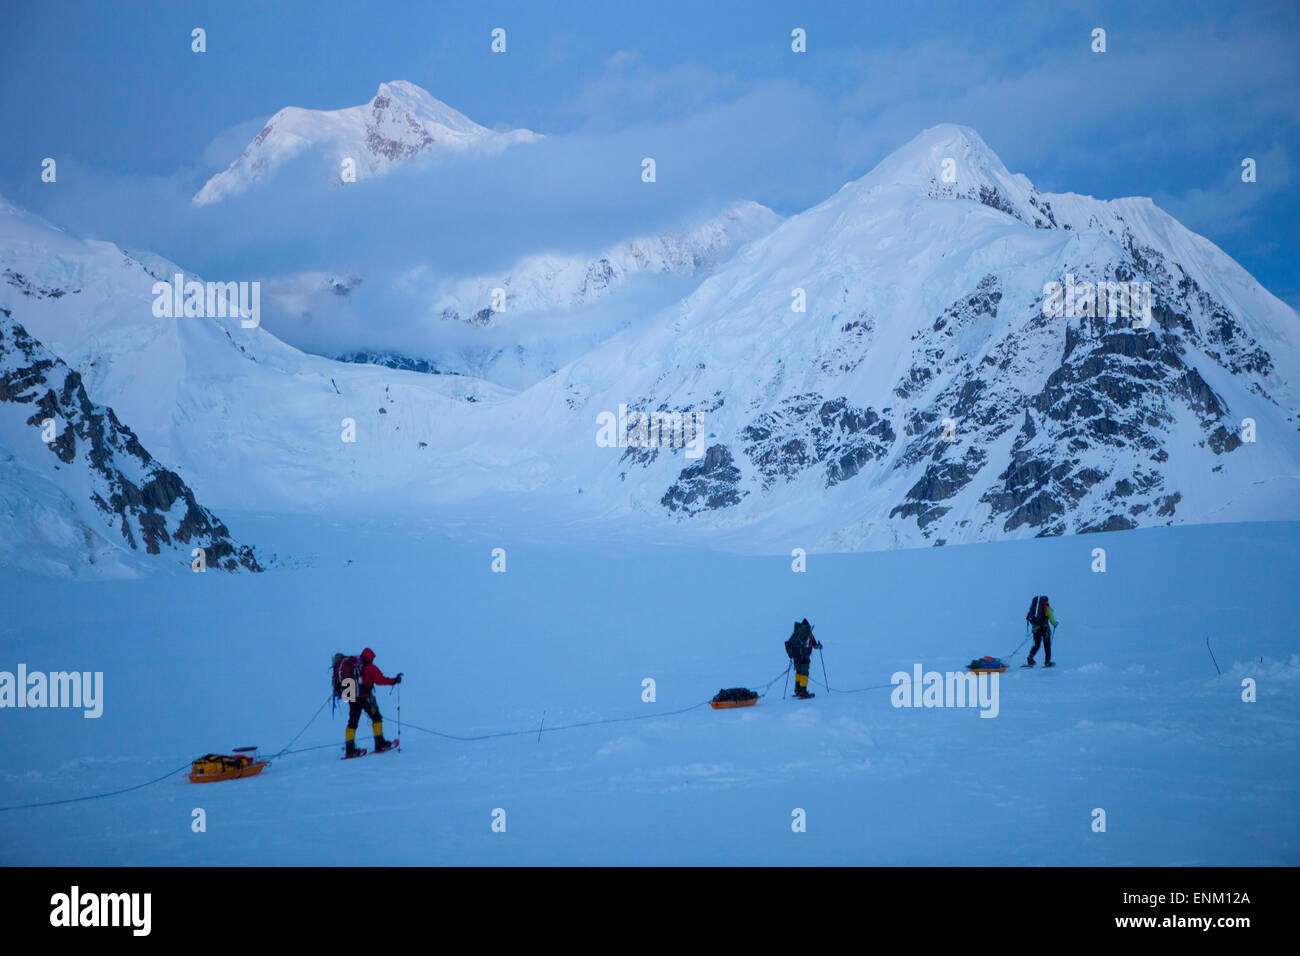 A team of three climbers on their way to base camp after reaching the summit of Mount McKinley, also known as Denali in Alaska. Mount Hunter in the background. Stock Photo